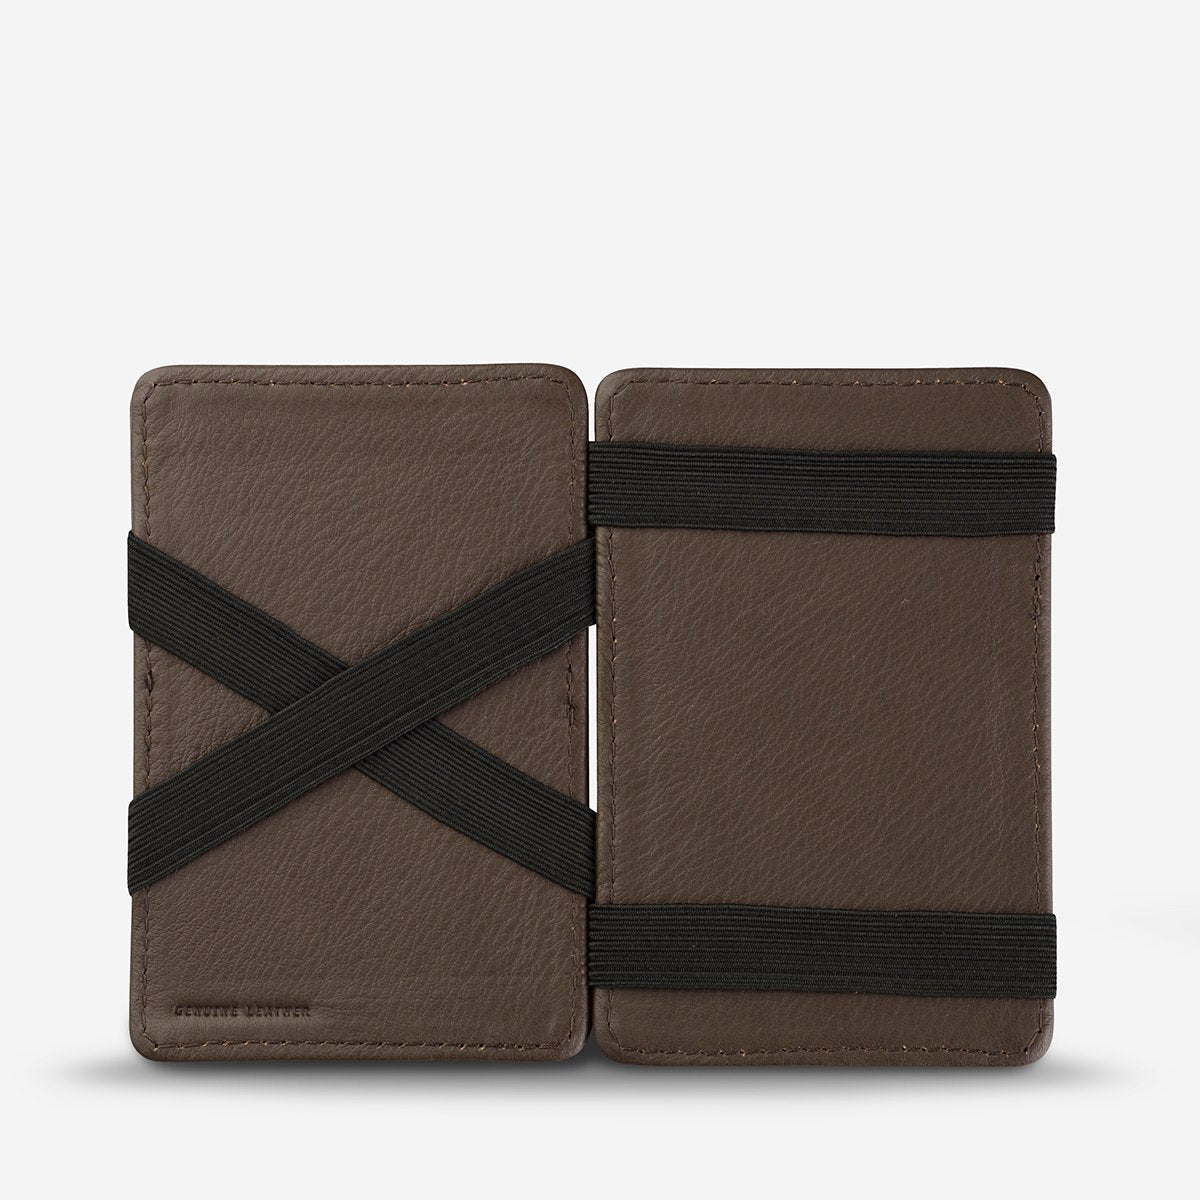 Status Anxiety Flip Wallet in Chocolate Opened